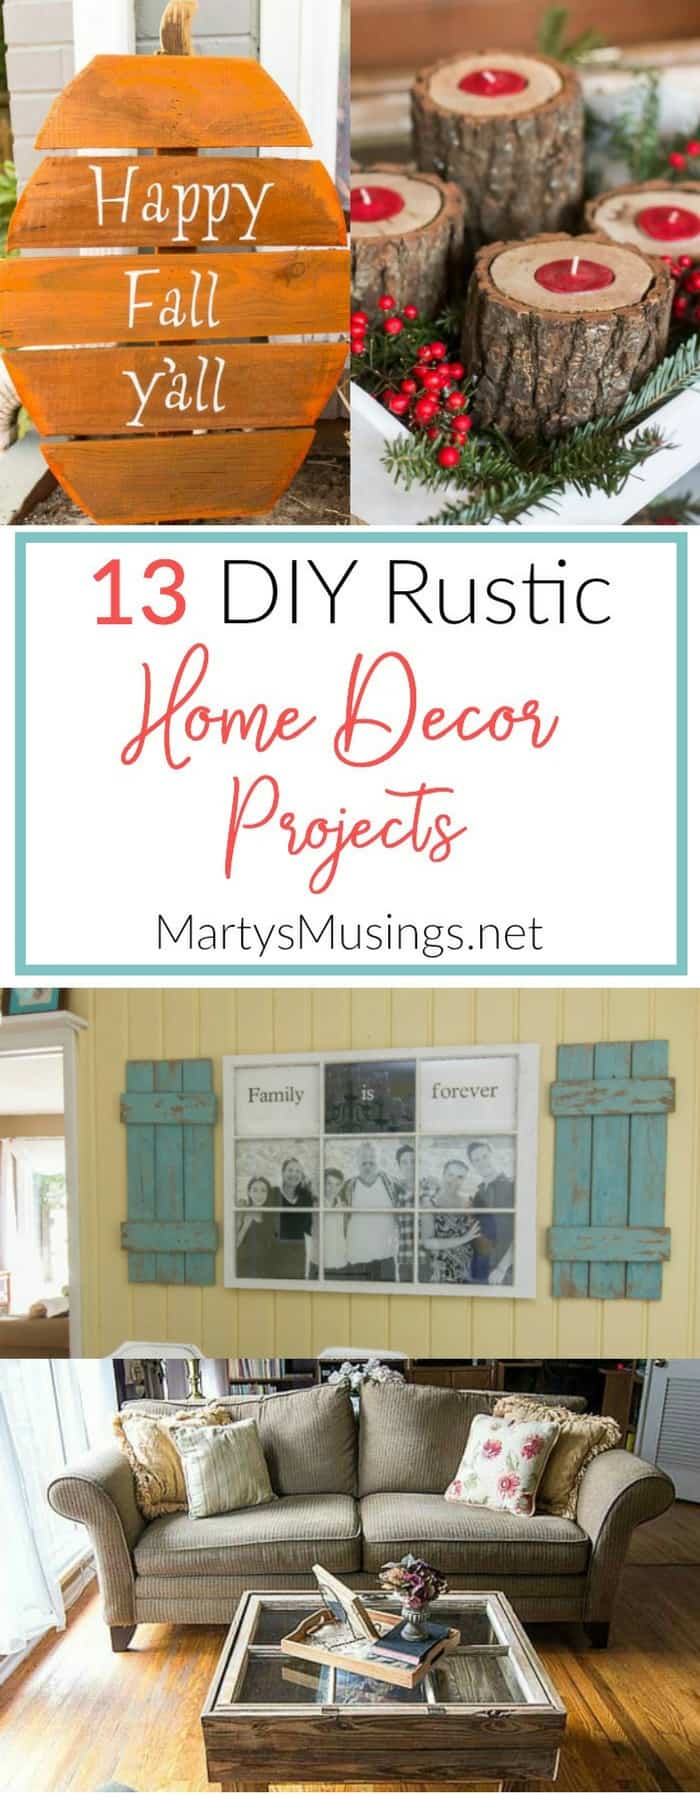 13 DIY Rustic Home Decor Projects | Marty's Musings